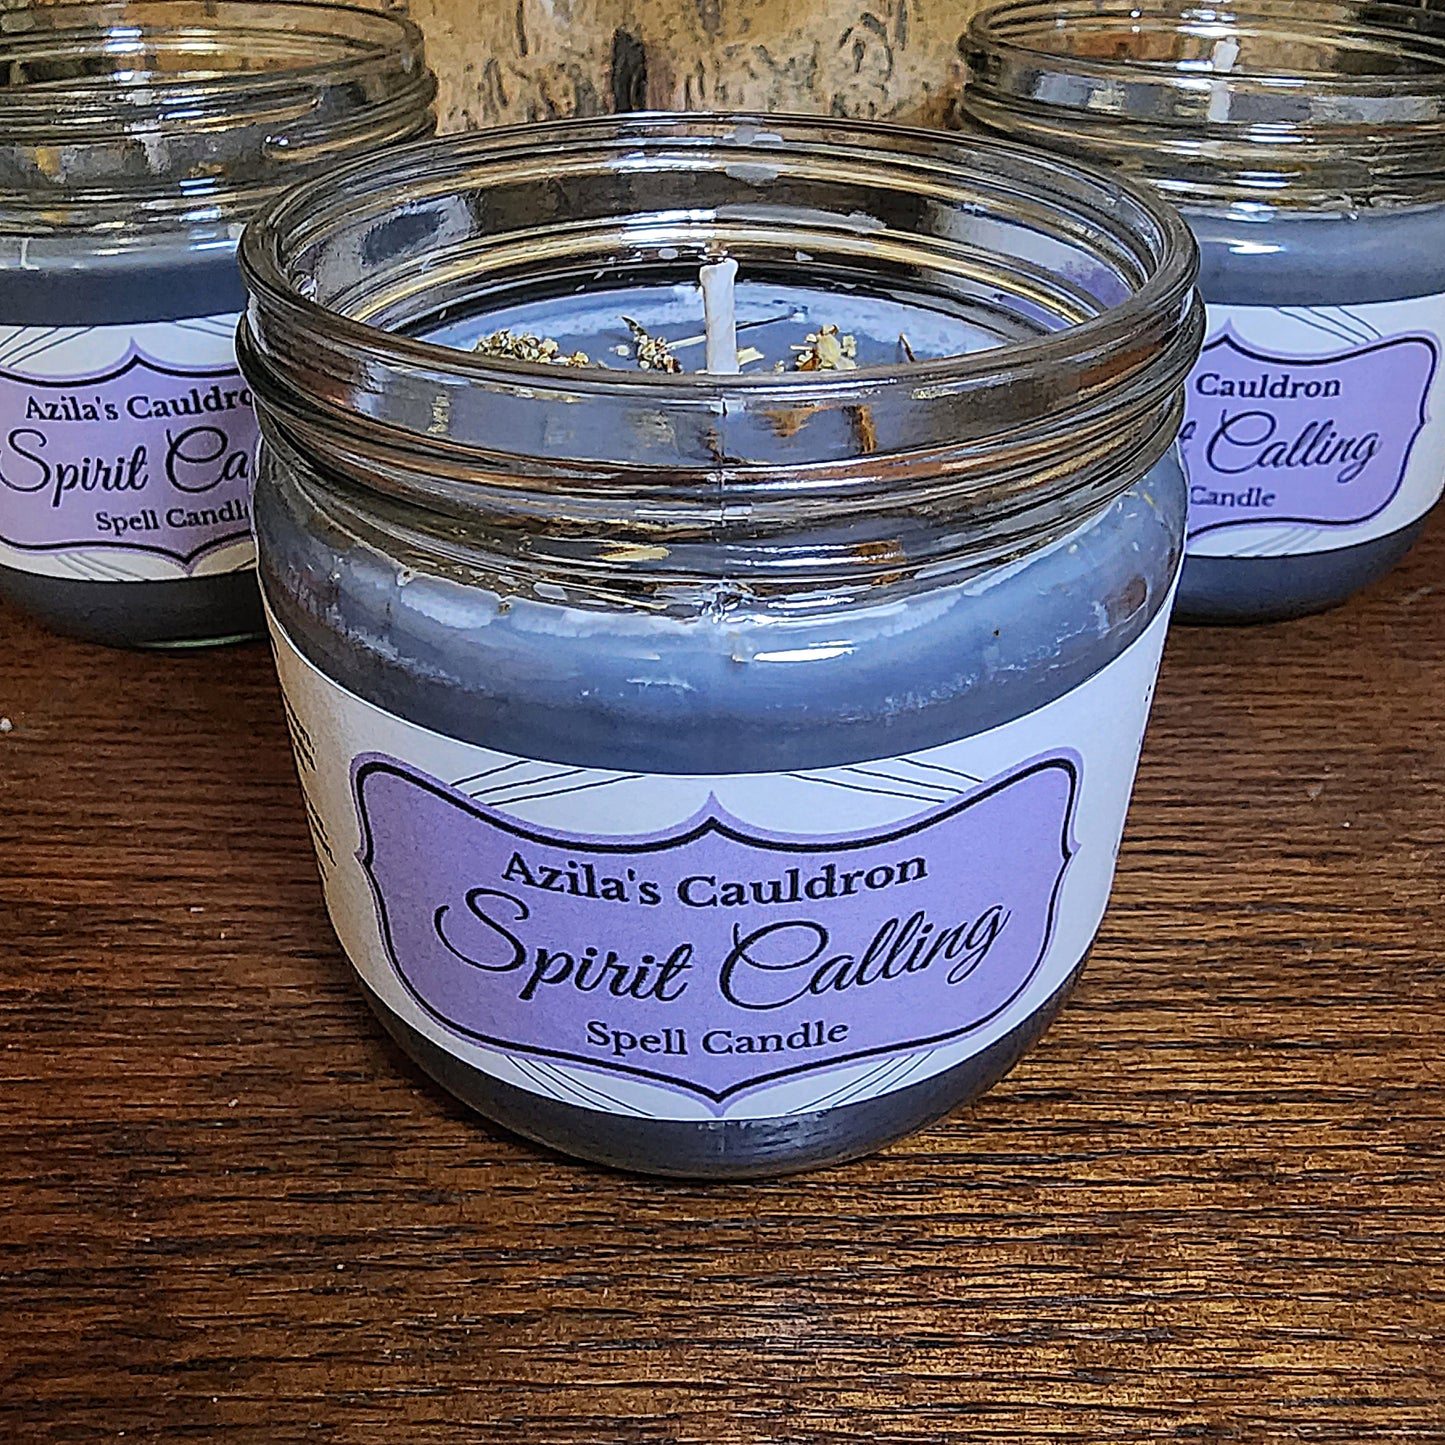 Spirit Calling Spell Candle